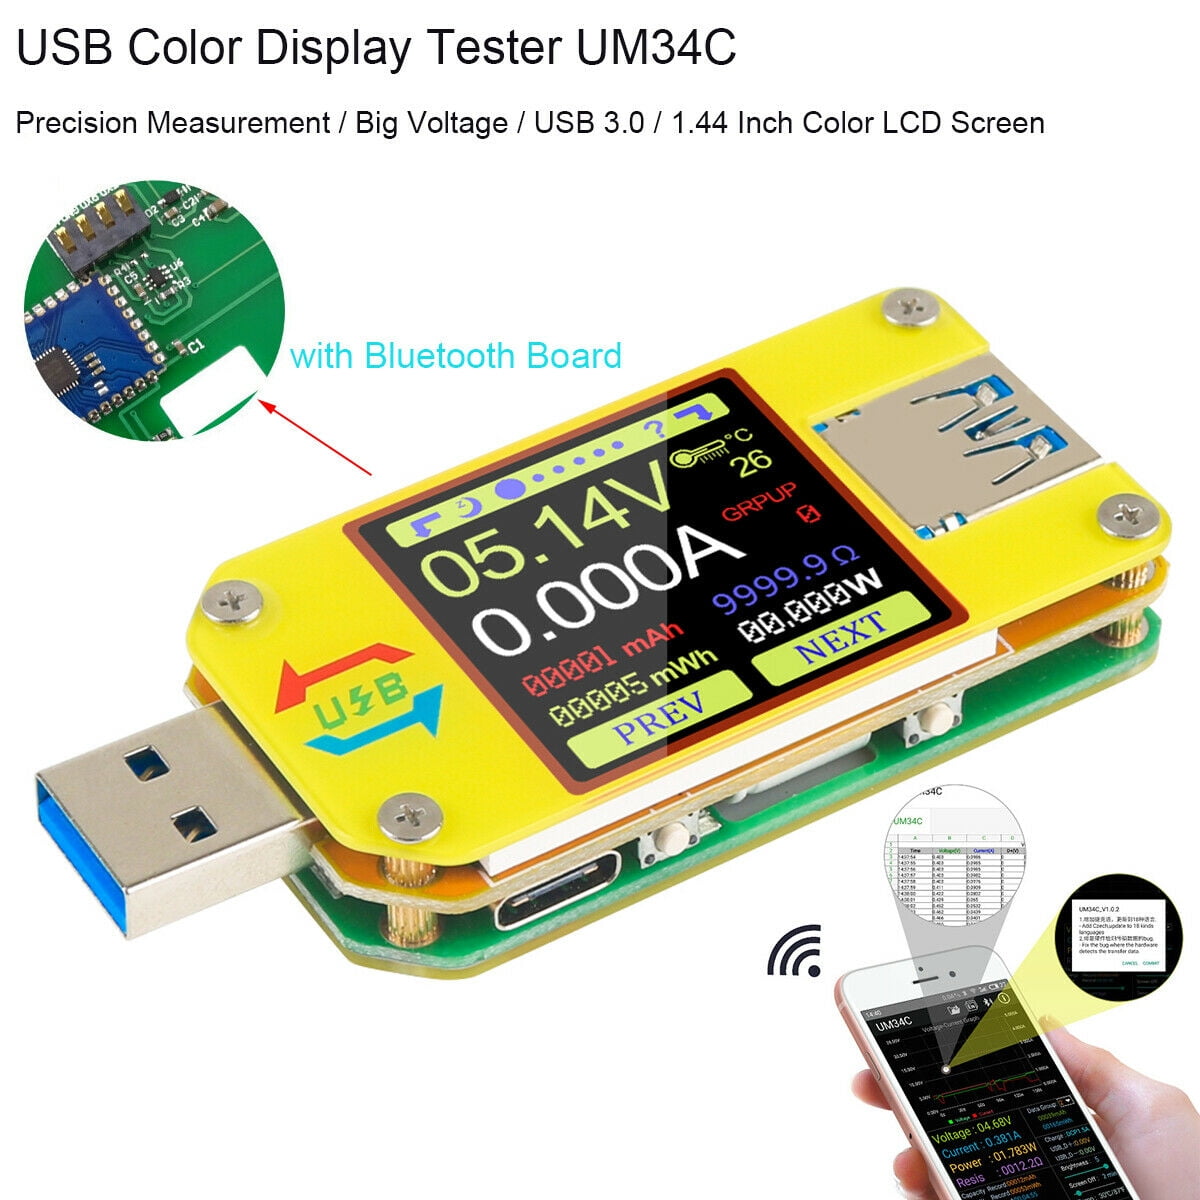 UM34C Type-C USB 3.0 Color LCD Display Voltage Current Capacity Tester+Bluetooth 